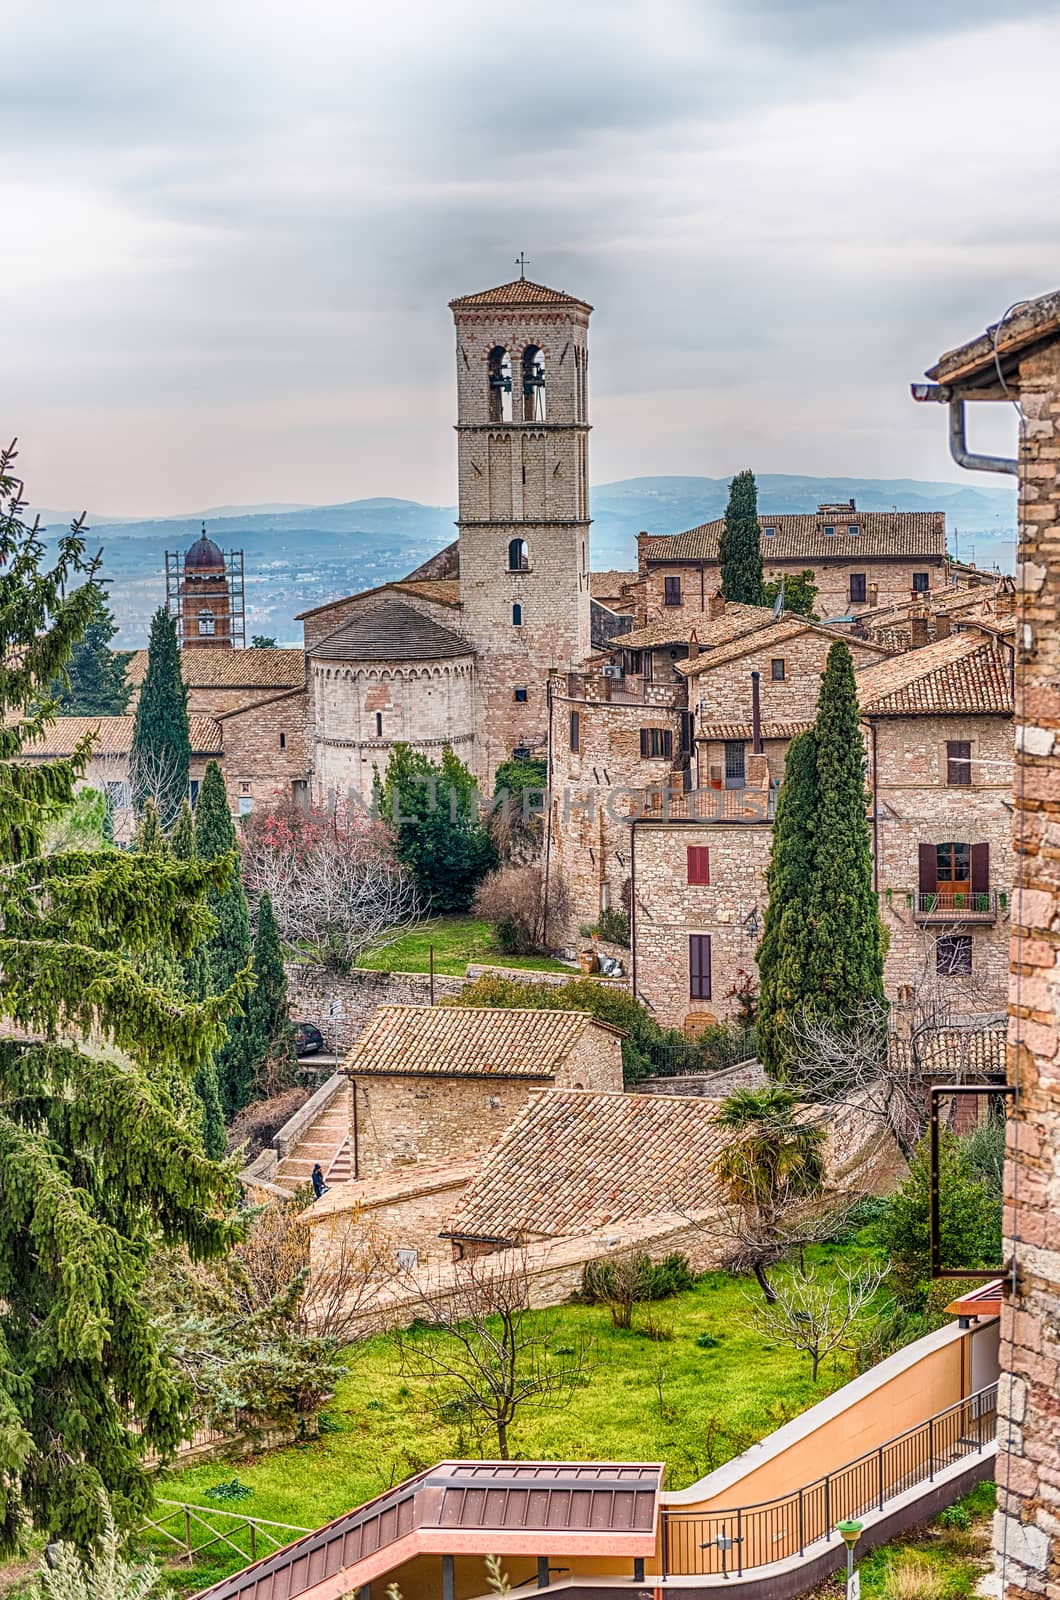 Scenic picturesque view of Assisi, one of the most beautiful medieval towns in central Italy